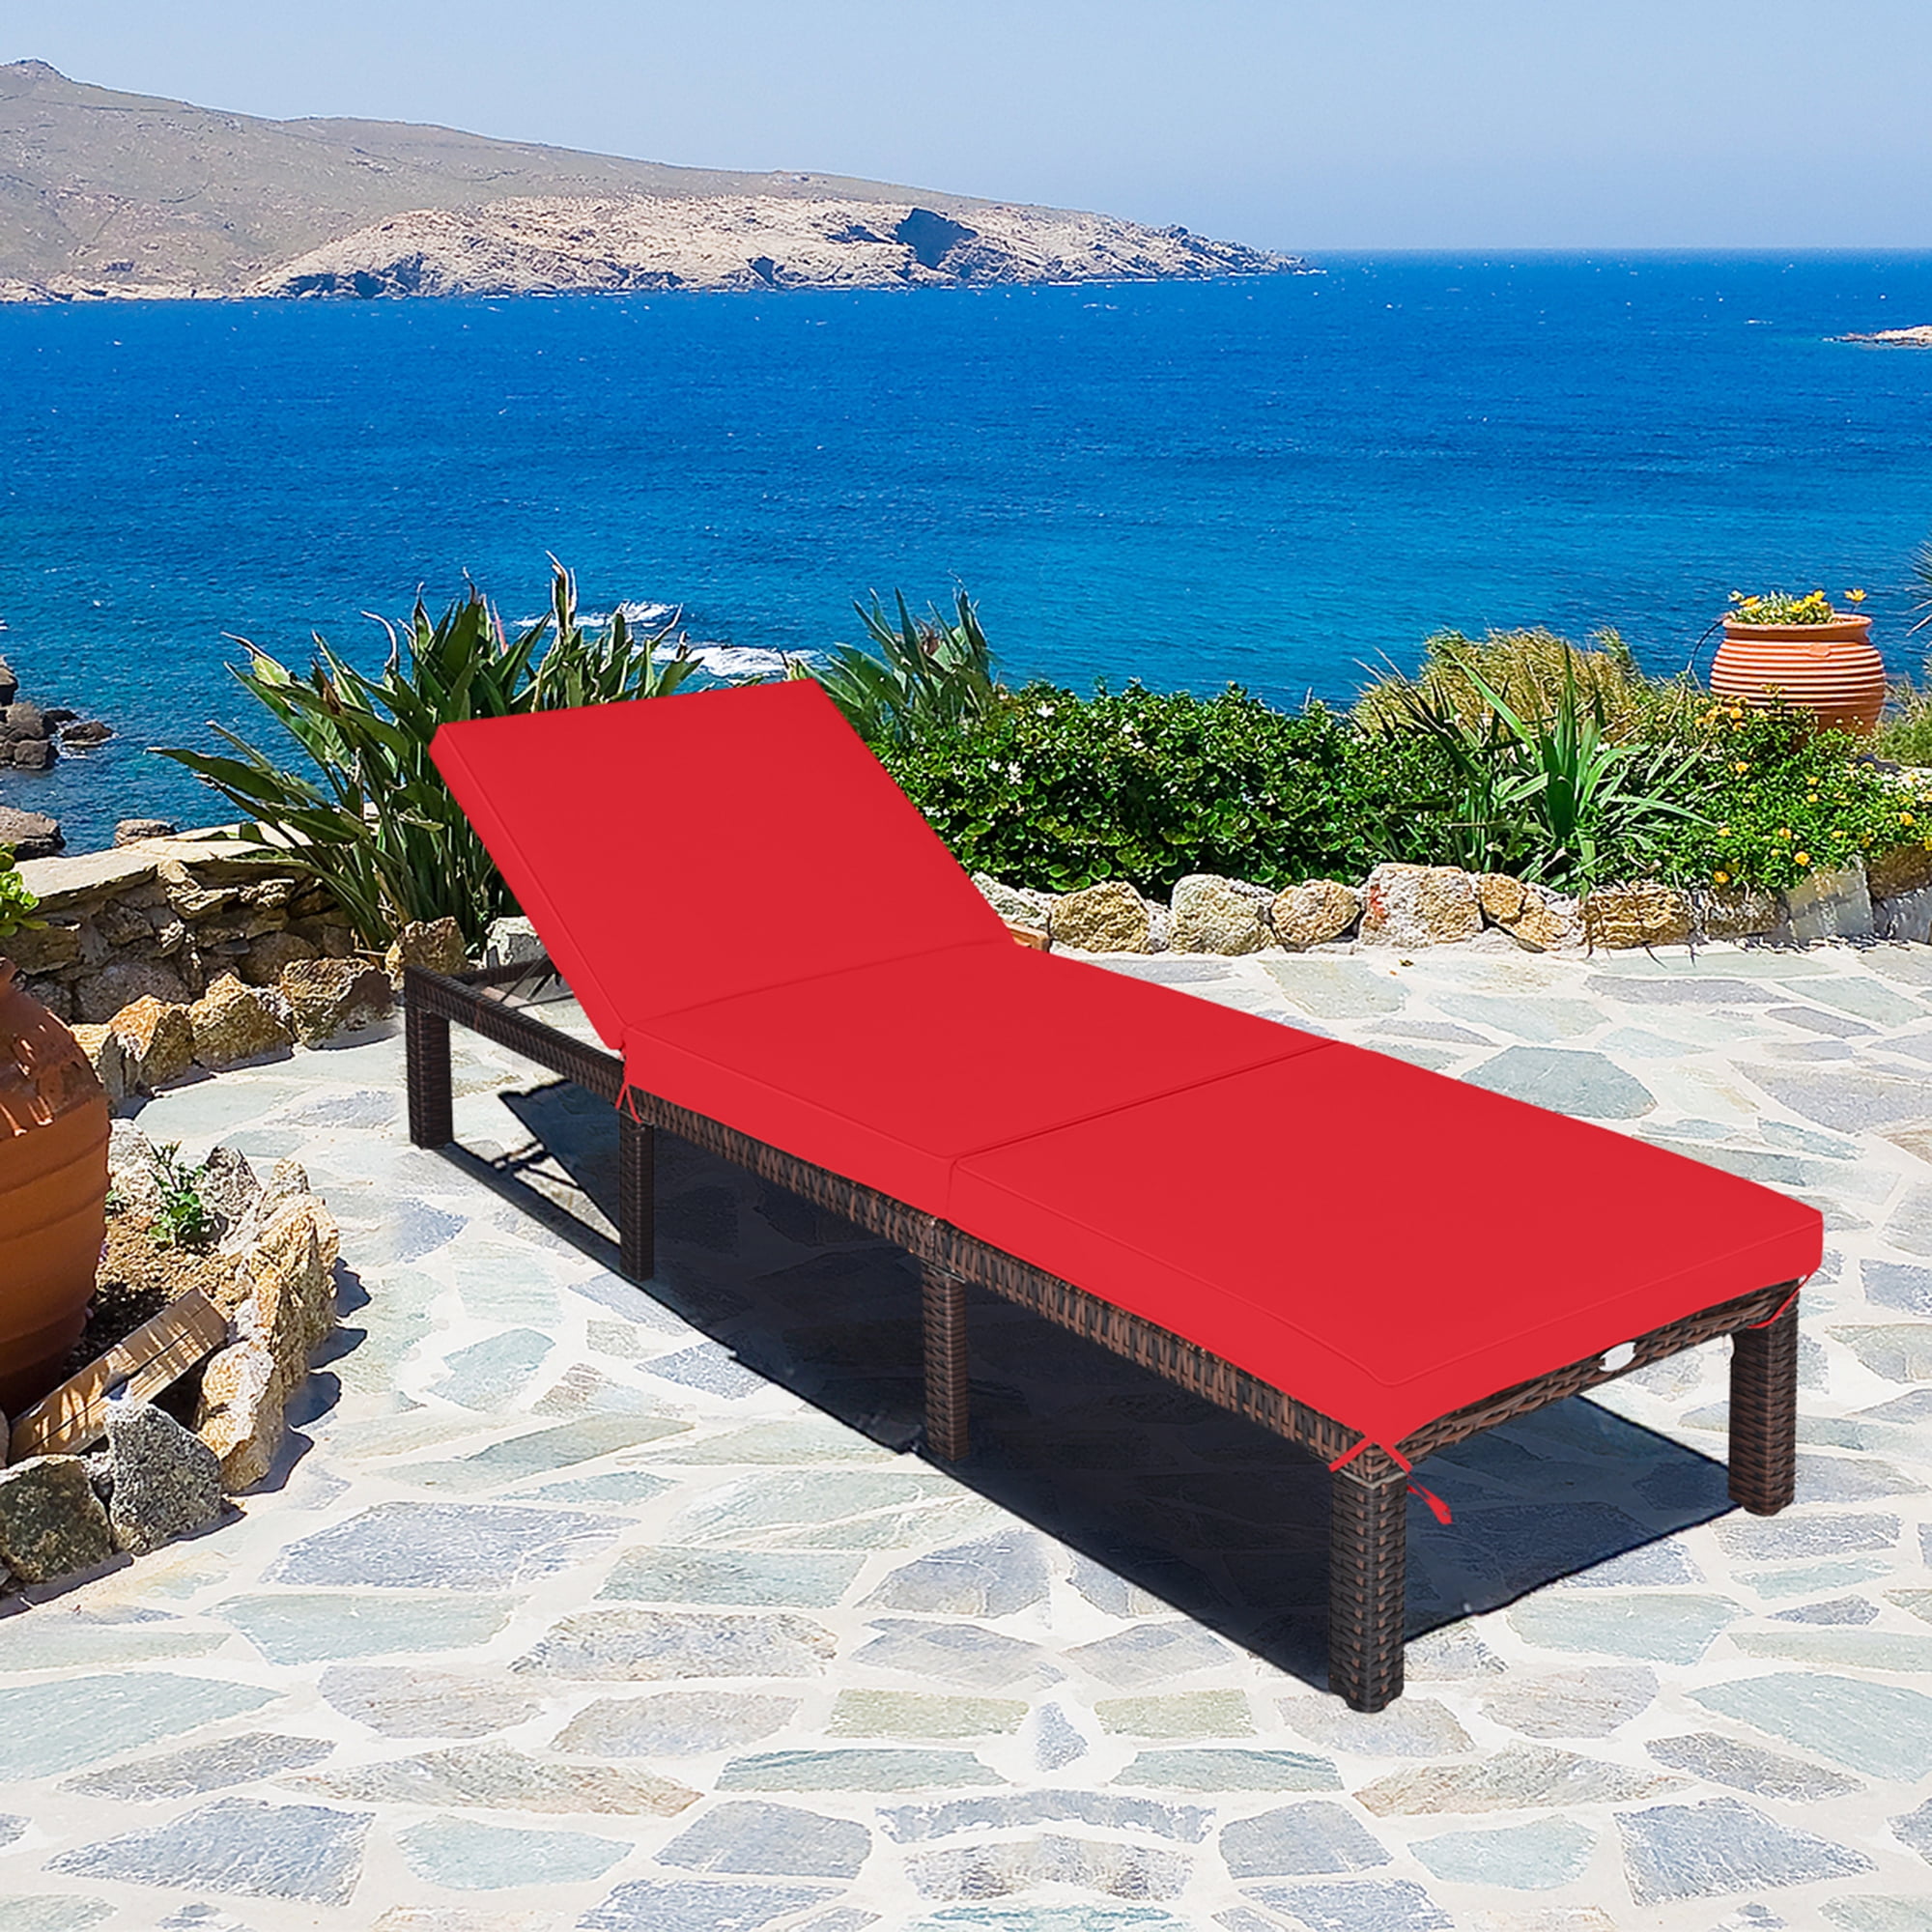 Turquoise Chaise Lounge Chair / LexMod Peer Outdoor Wicker Chaise